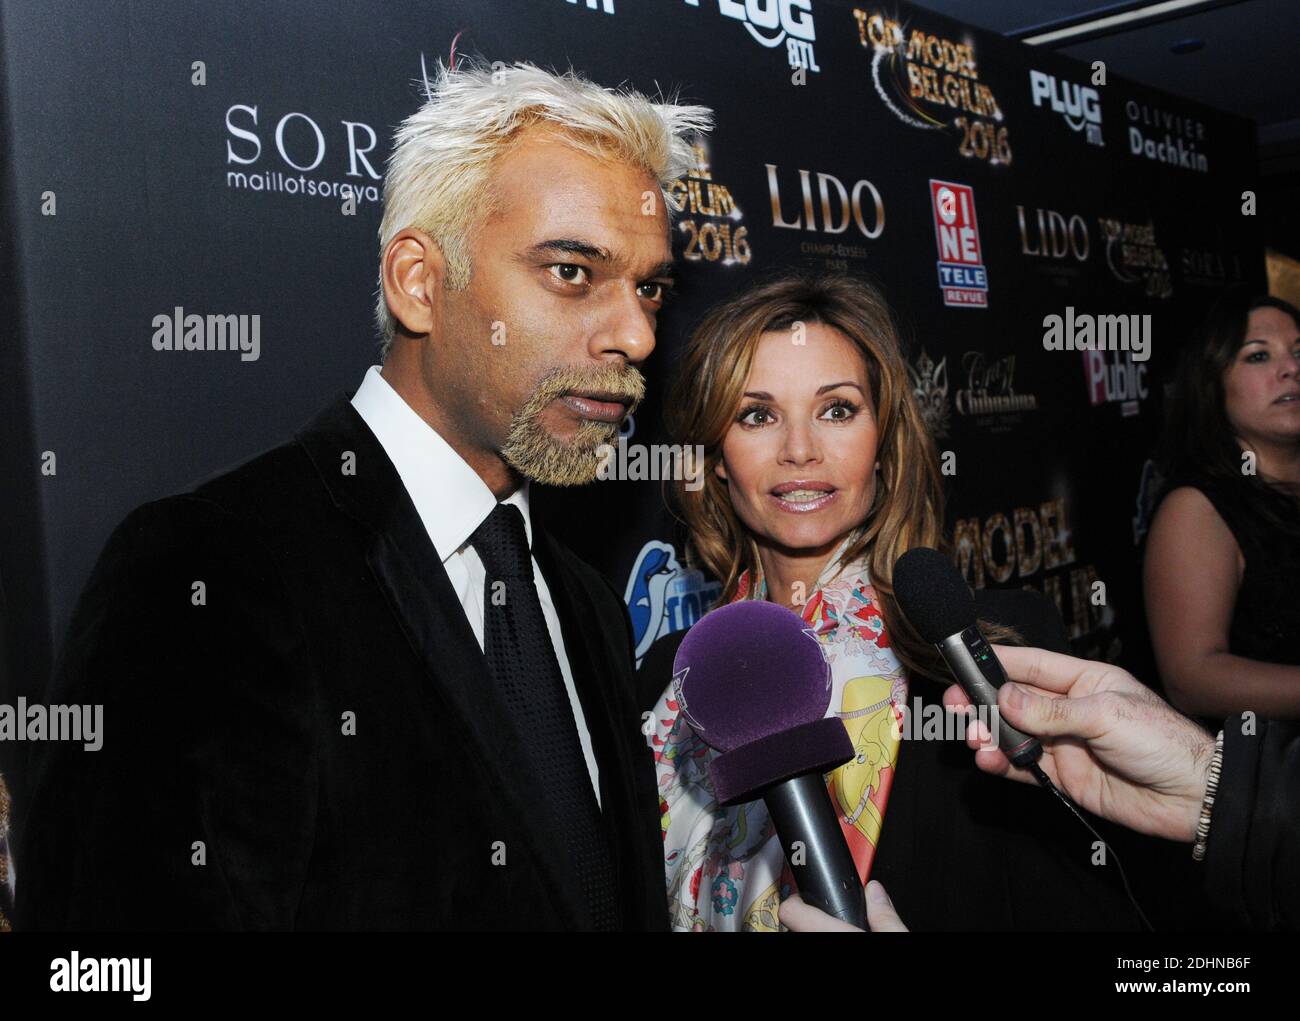 Satya Oblette, Ingrid Chauvin attending the 'Top Model Belgium 2016'  Ceremony at Le Lido on January 24, 2016 in Paris, France. Photo by Alain  Apaydin/ABACAPRESS.COM Stock Photo - Alamy